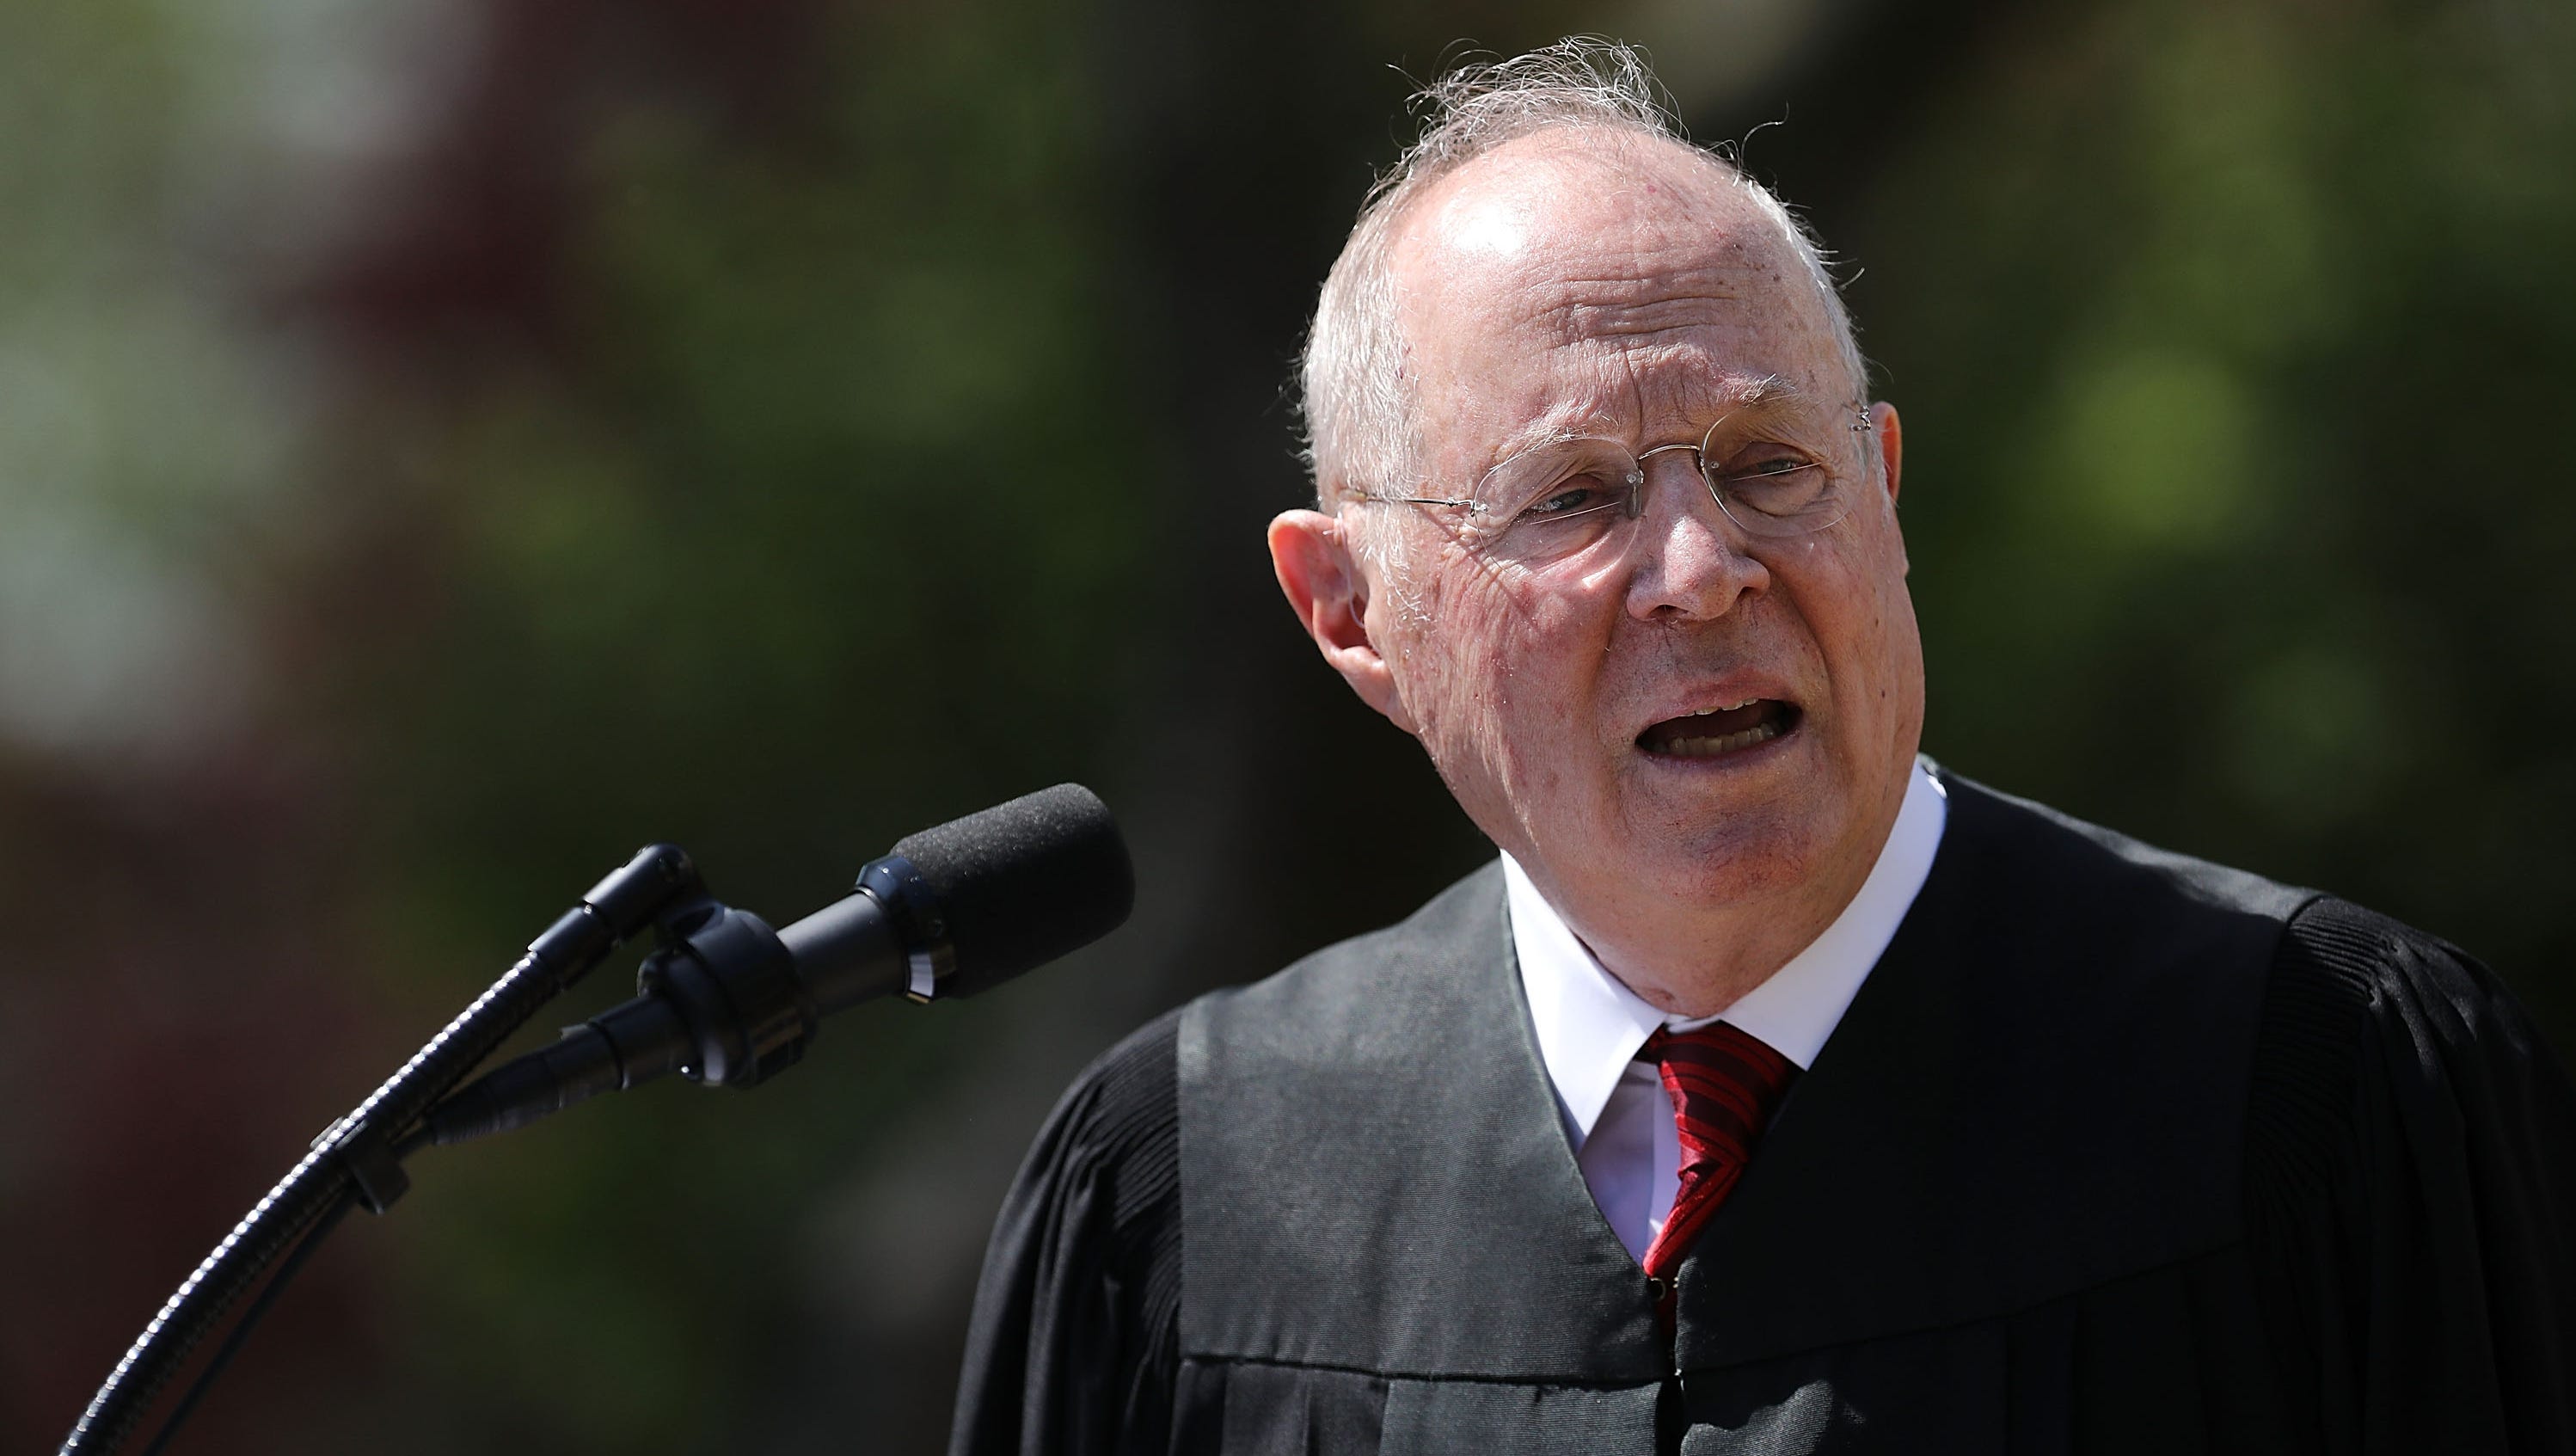 U.S. Supreme Court Associate Justice Anthony Kennedy.